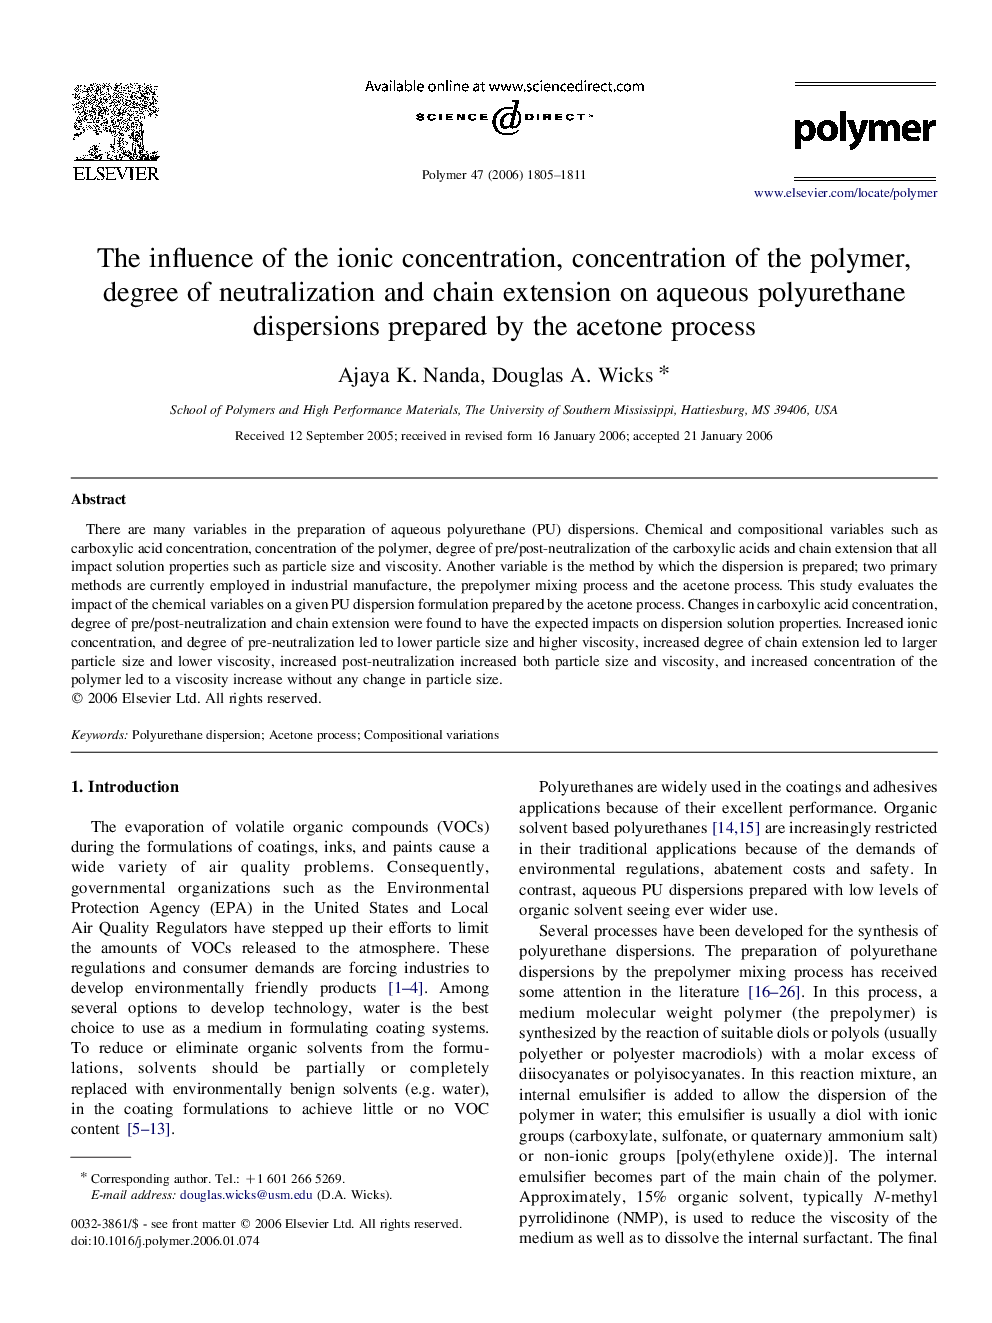 The influence of the ionic concentration, concentration of the polymer, degree of neutralization and chain extension on aqueous polyurethane dispersions prepared by the acetone process